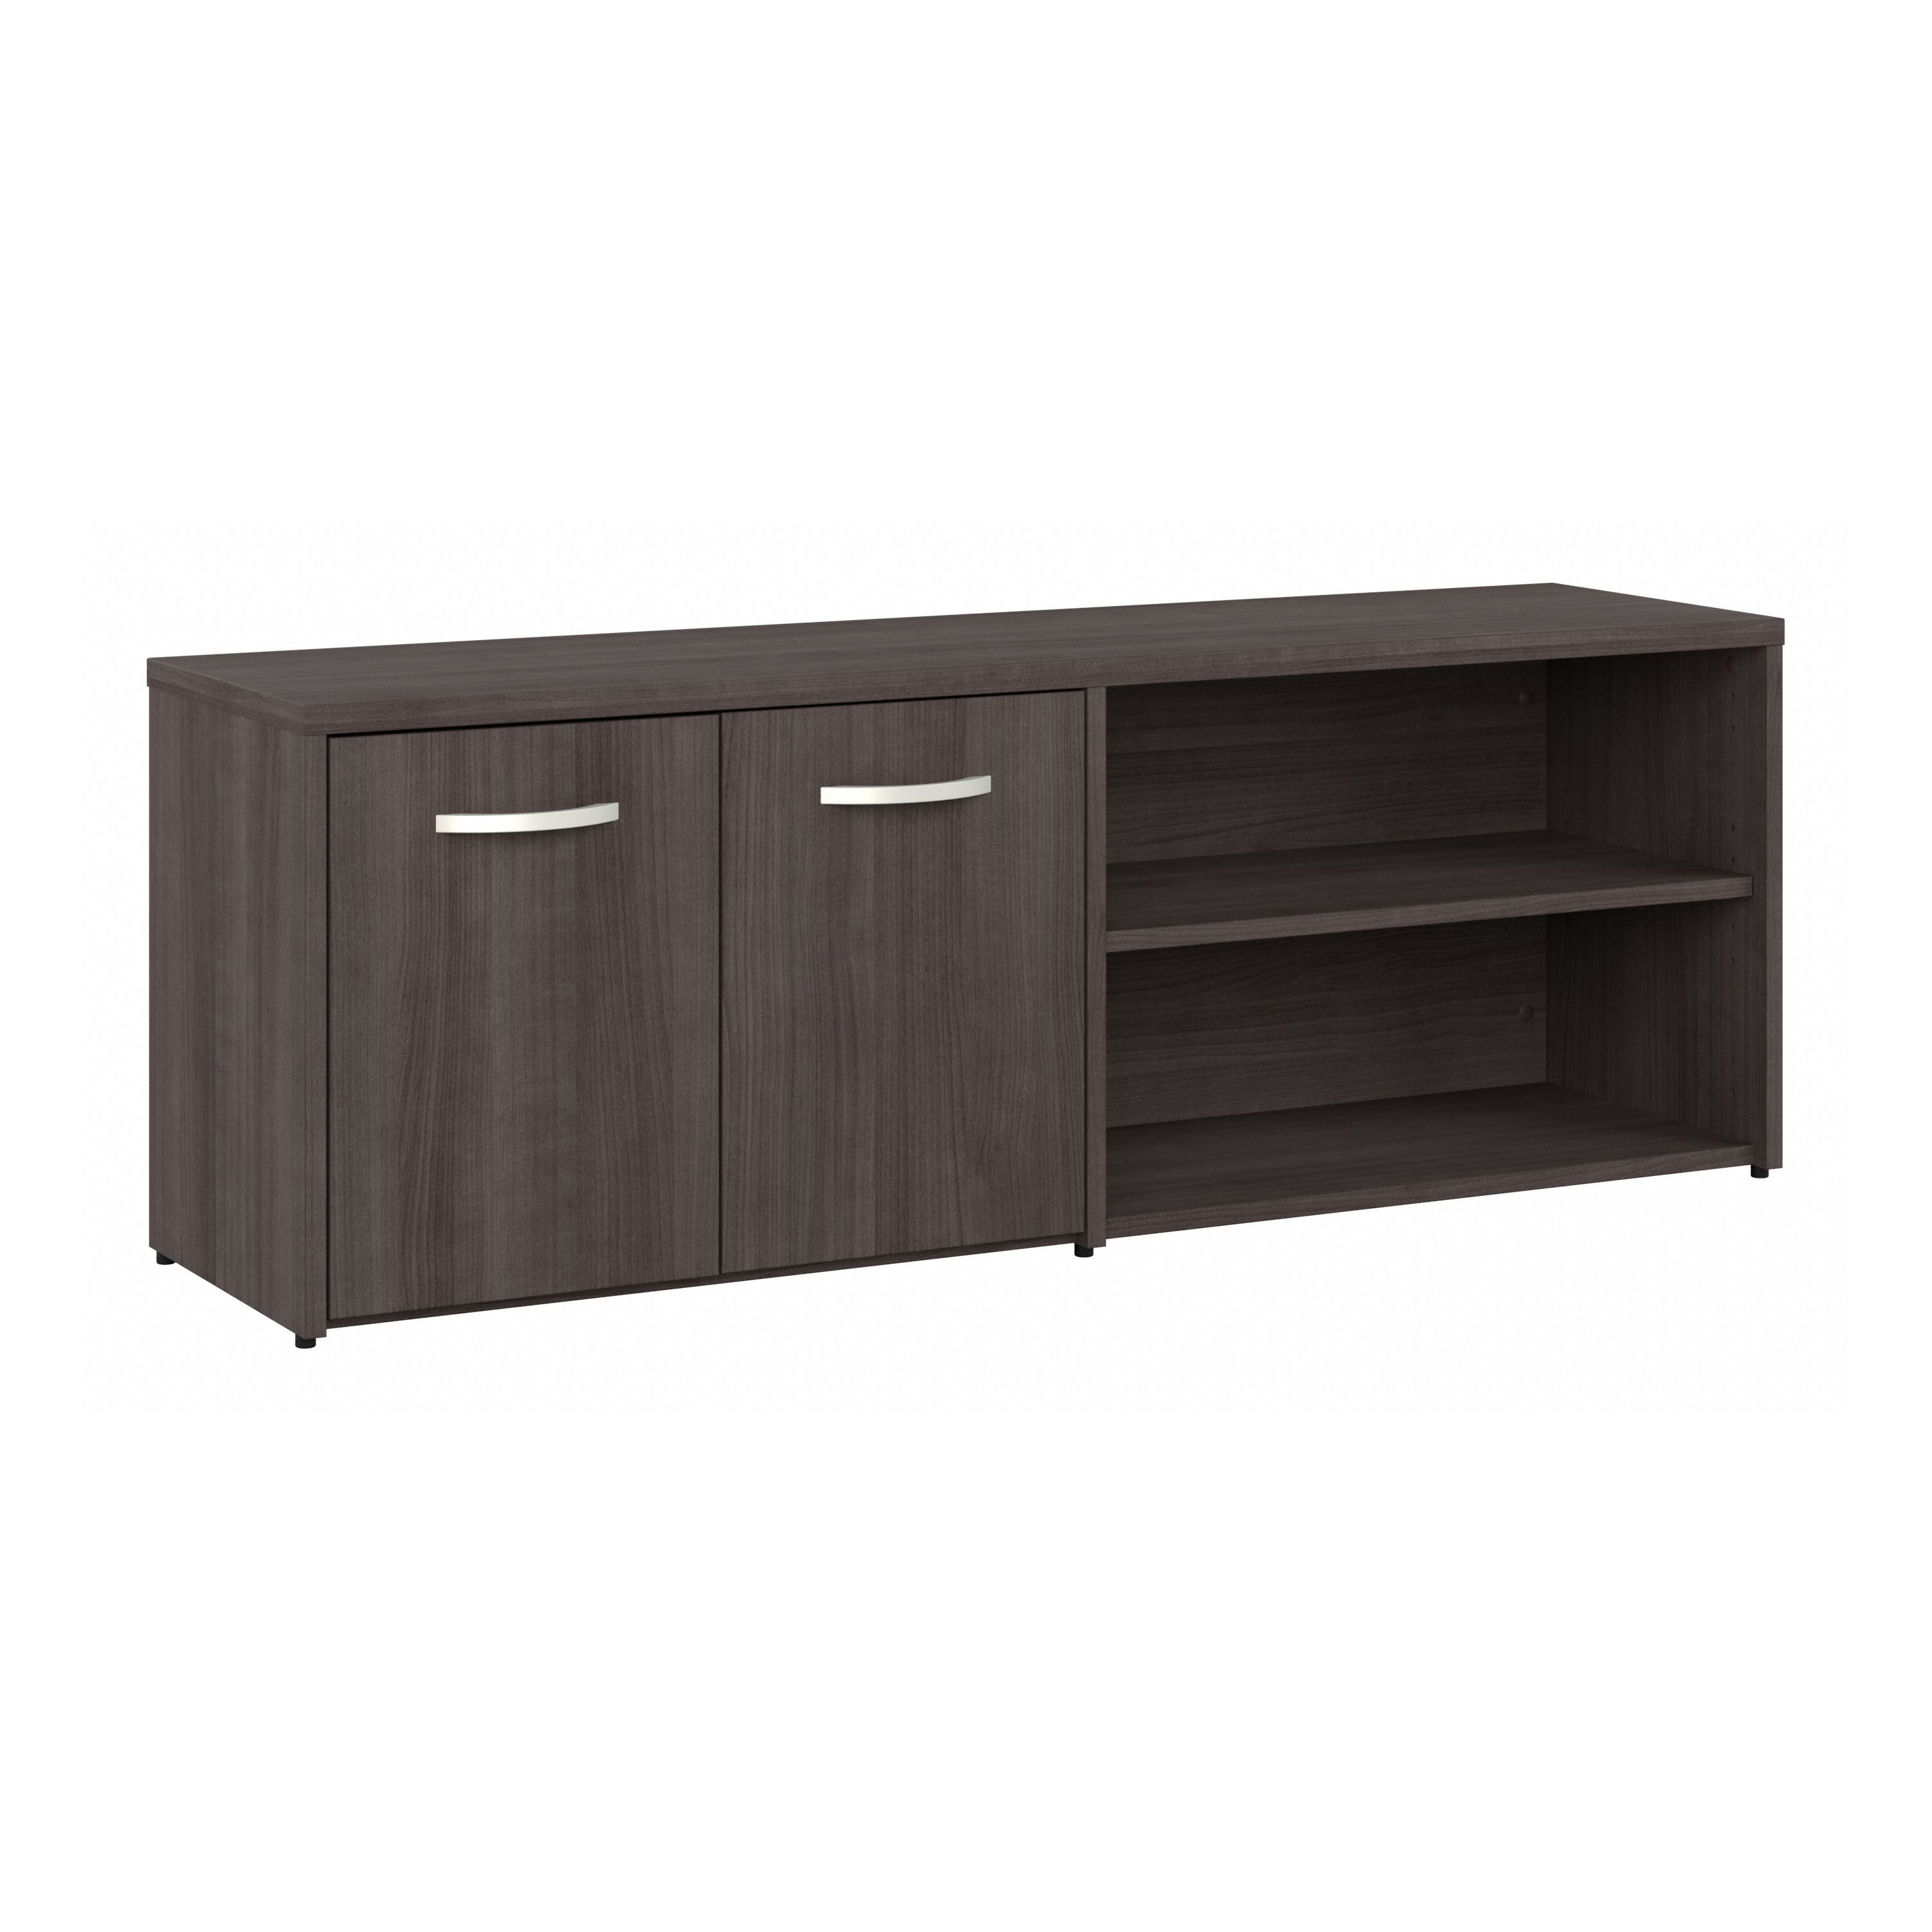 Shop Bush Business Furniture Hybrid Low Storage Cabinet with Doors and Shelves 02 HYS160SG-Z #color_storm gray